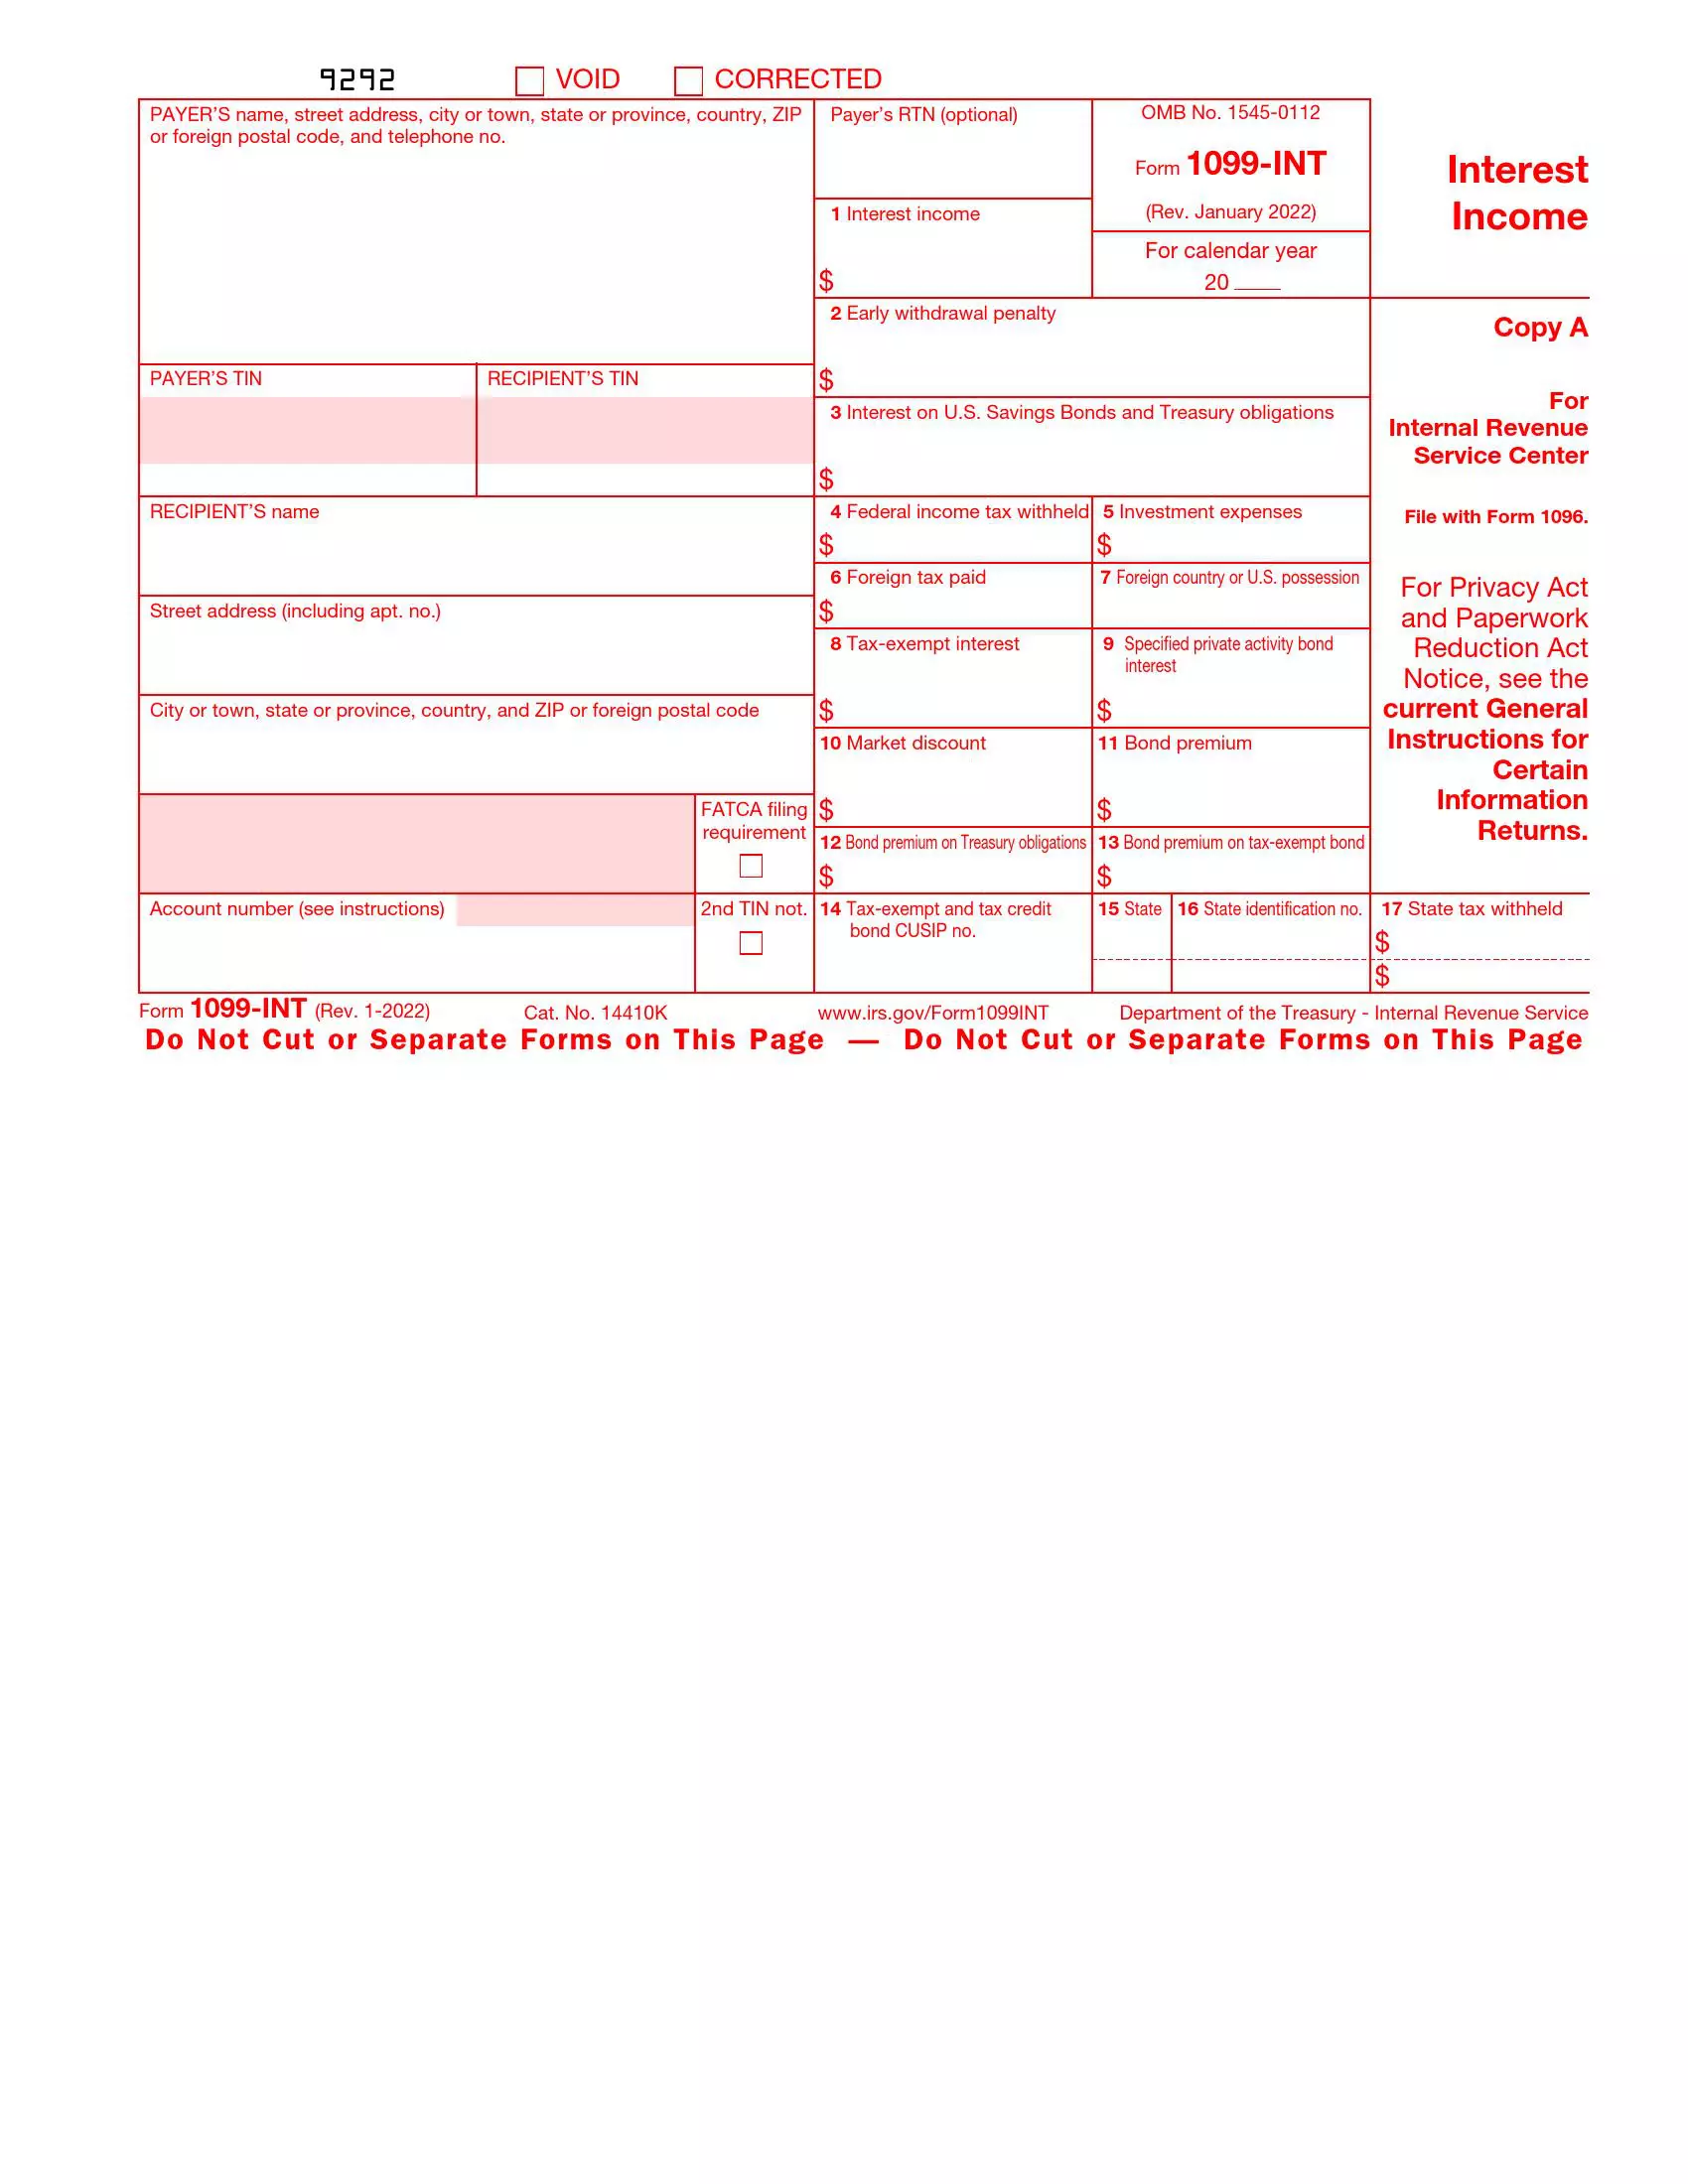 irs form 1099-int rev 01 2022 preview